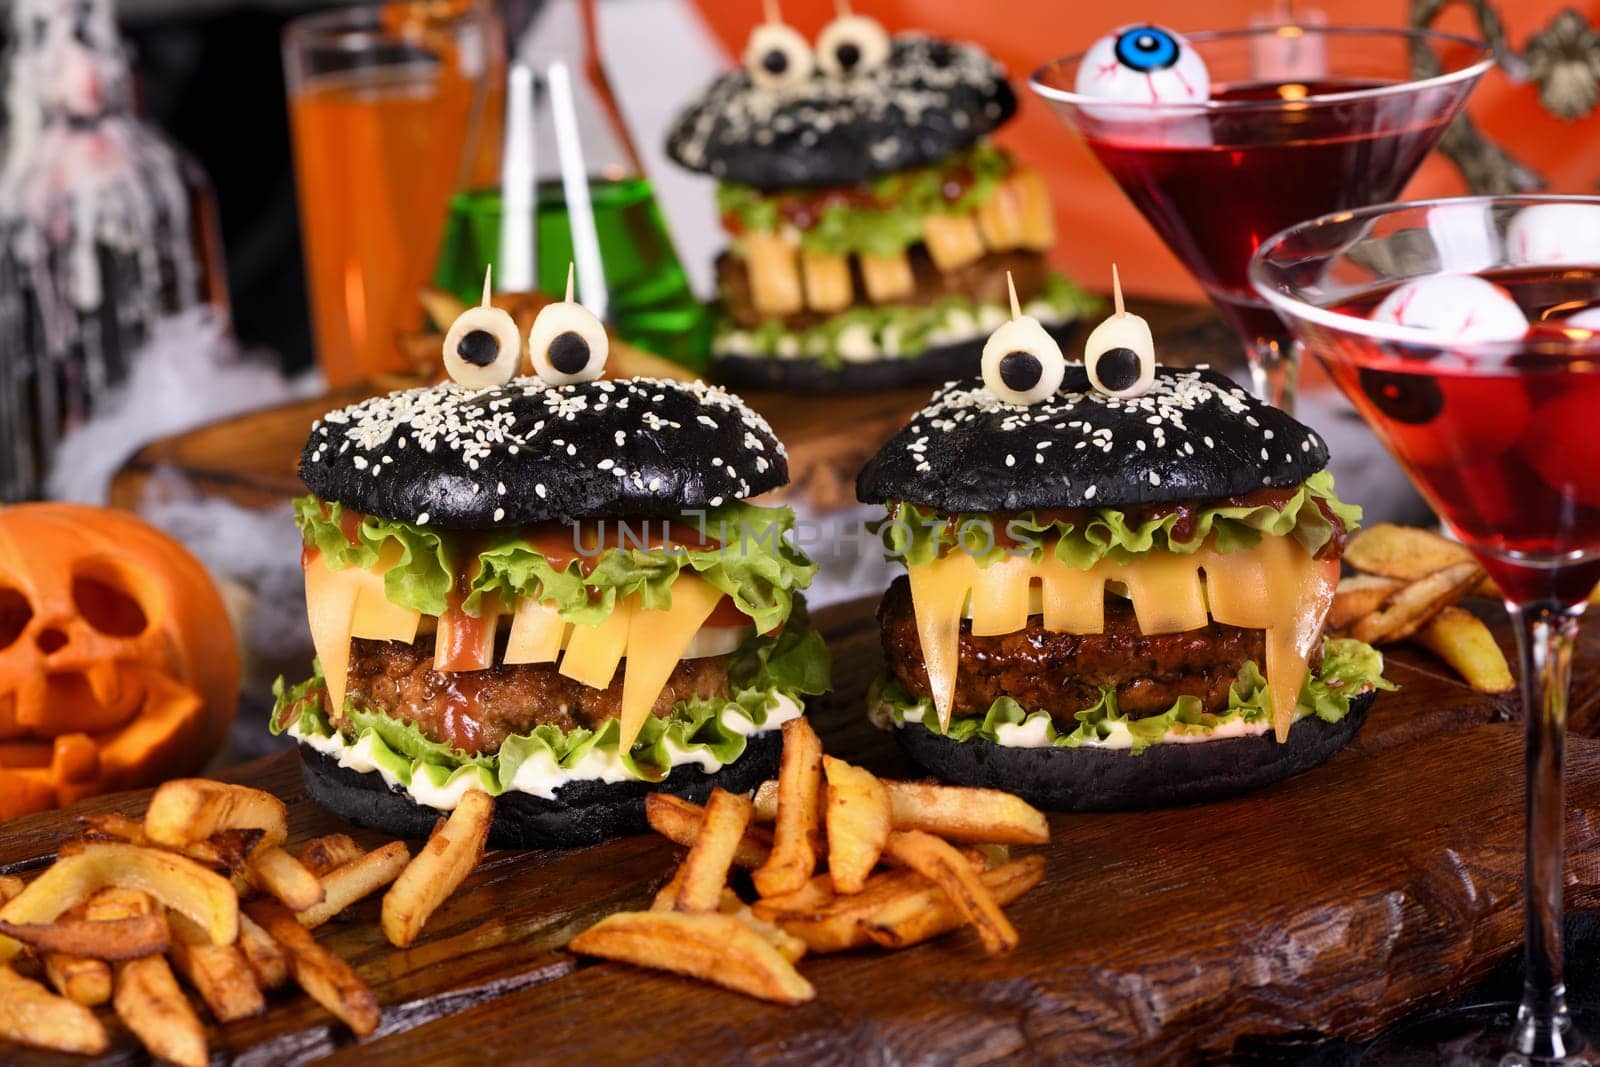 Monster Burger. Black bun, juicy beef cutlet, lettuce, onion, tomato and cheese in the shape of teeth, mozzarella eyes with olives. Definitely a pick-me-up and a perfect Halloween party appetizer.